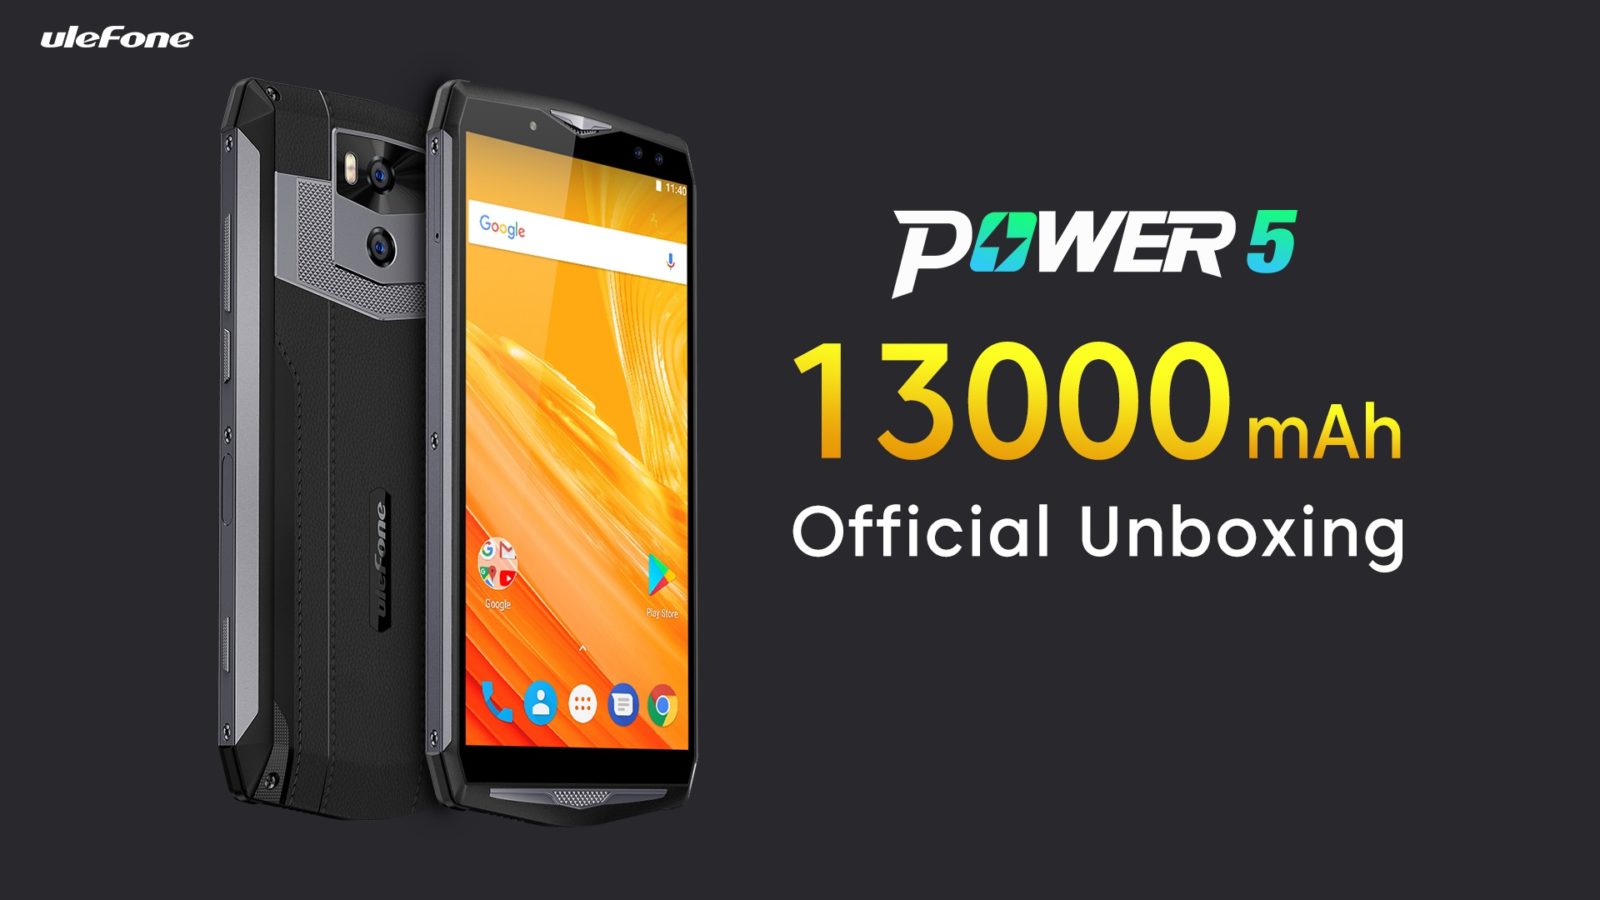 Video: Unboxing del Ulefone Power